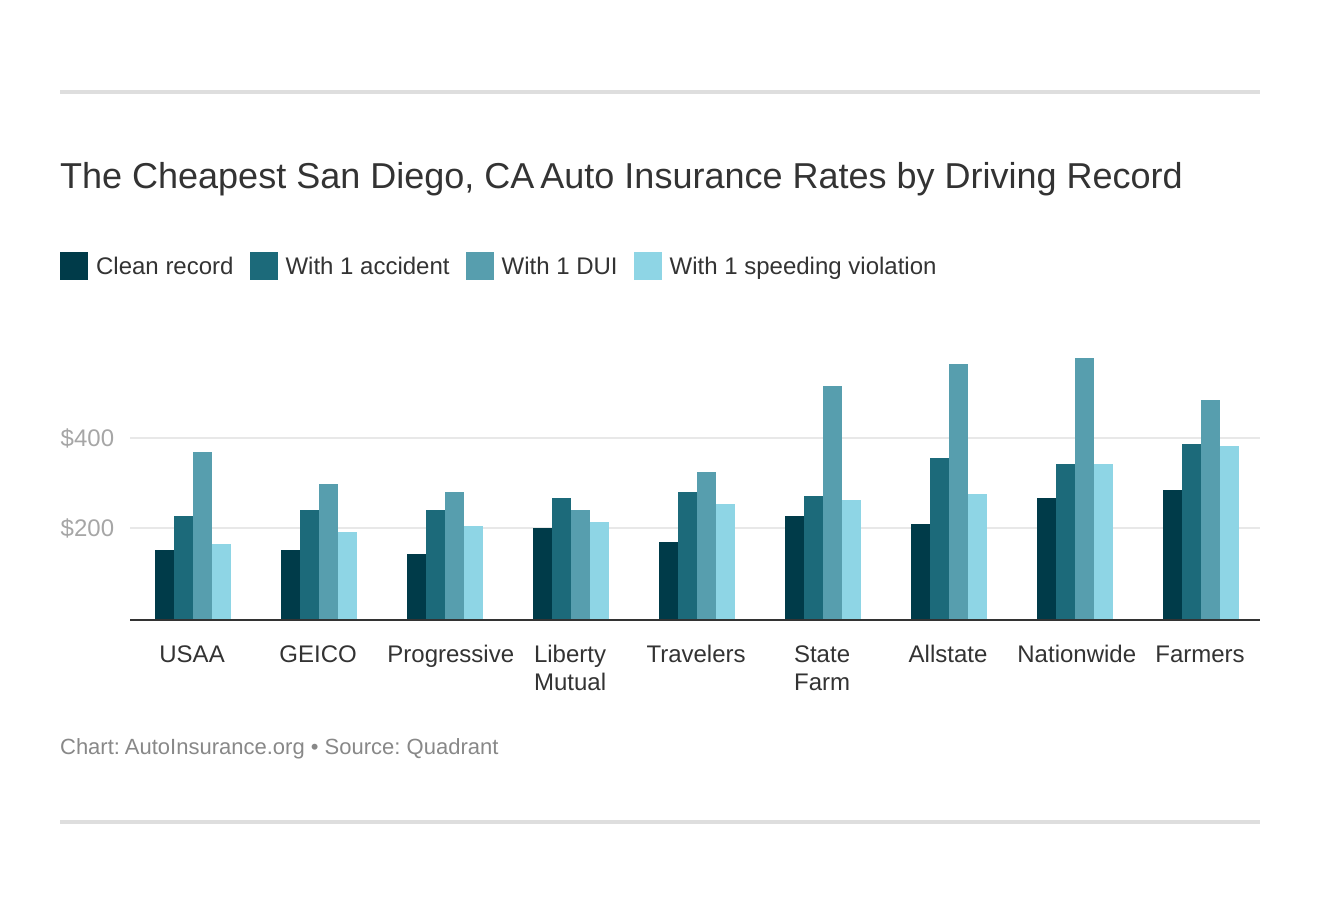 The Cheapest San Diego, CA Auto Insurance Rates by Driving Record